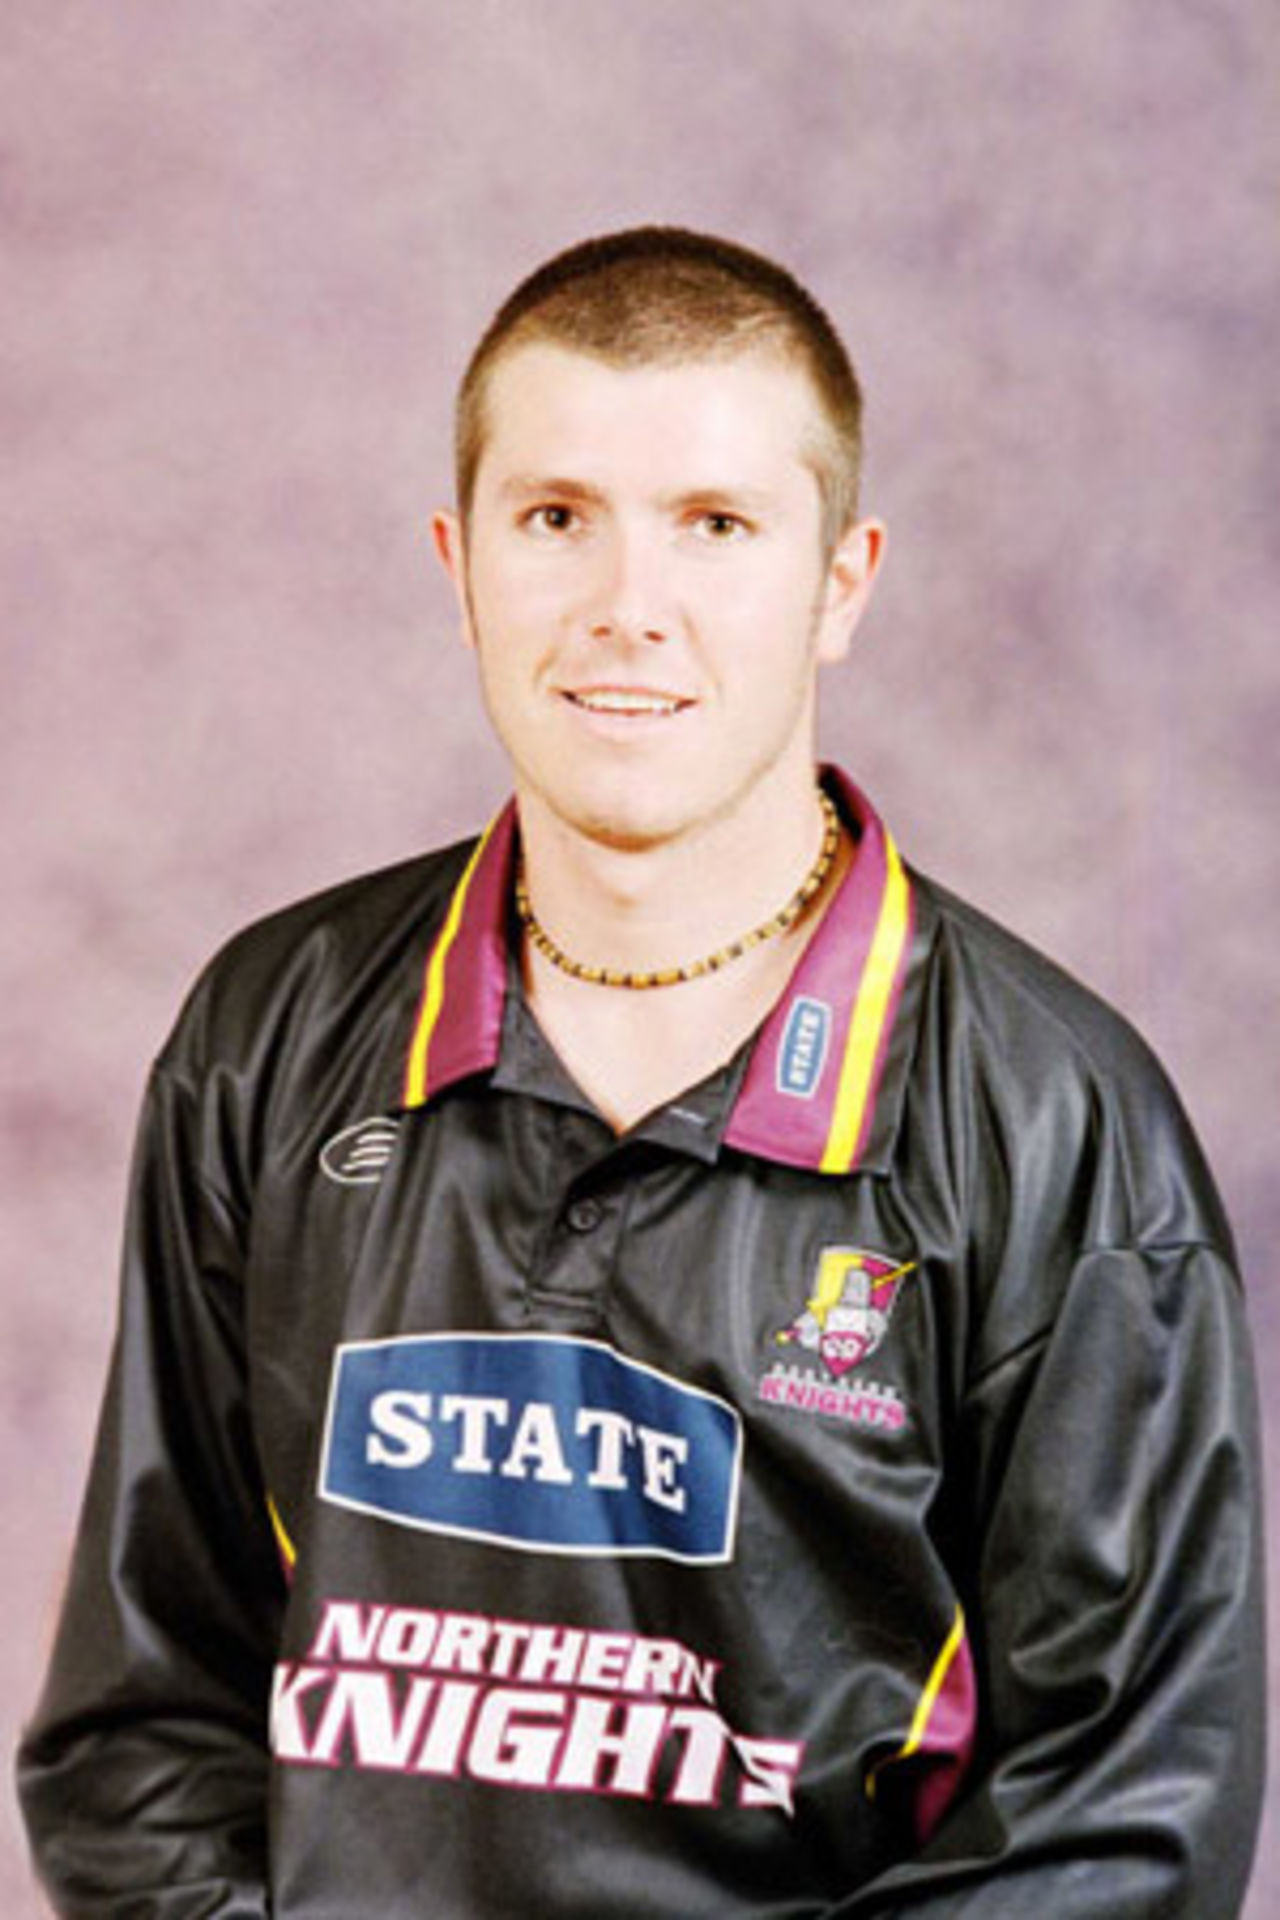 Portrait of Grant Robinson, Northern Districts player in the 2001/02 season.